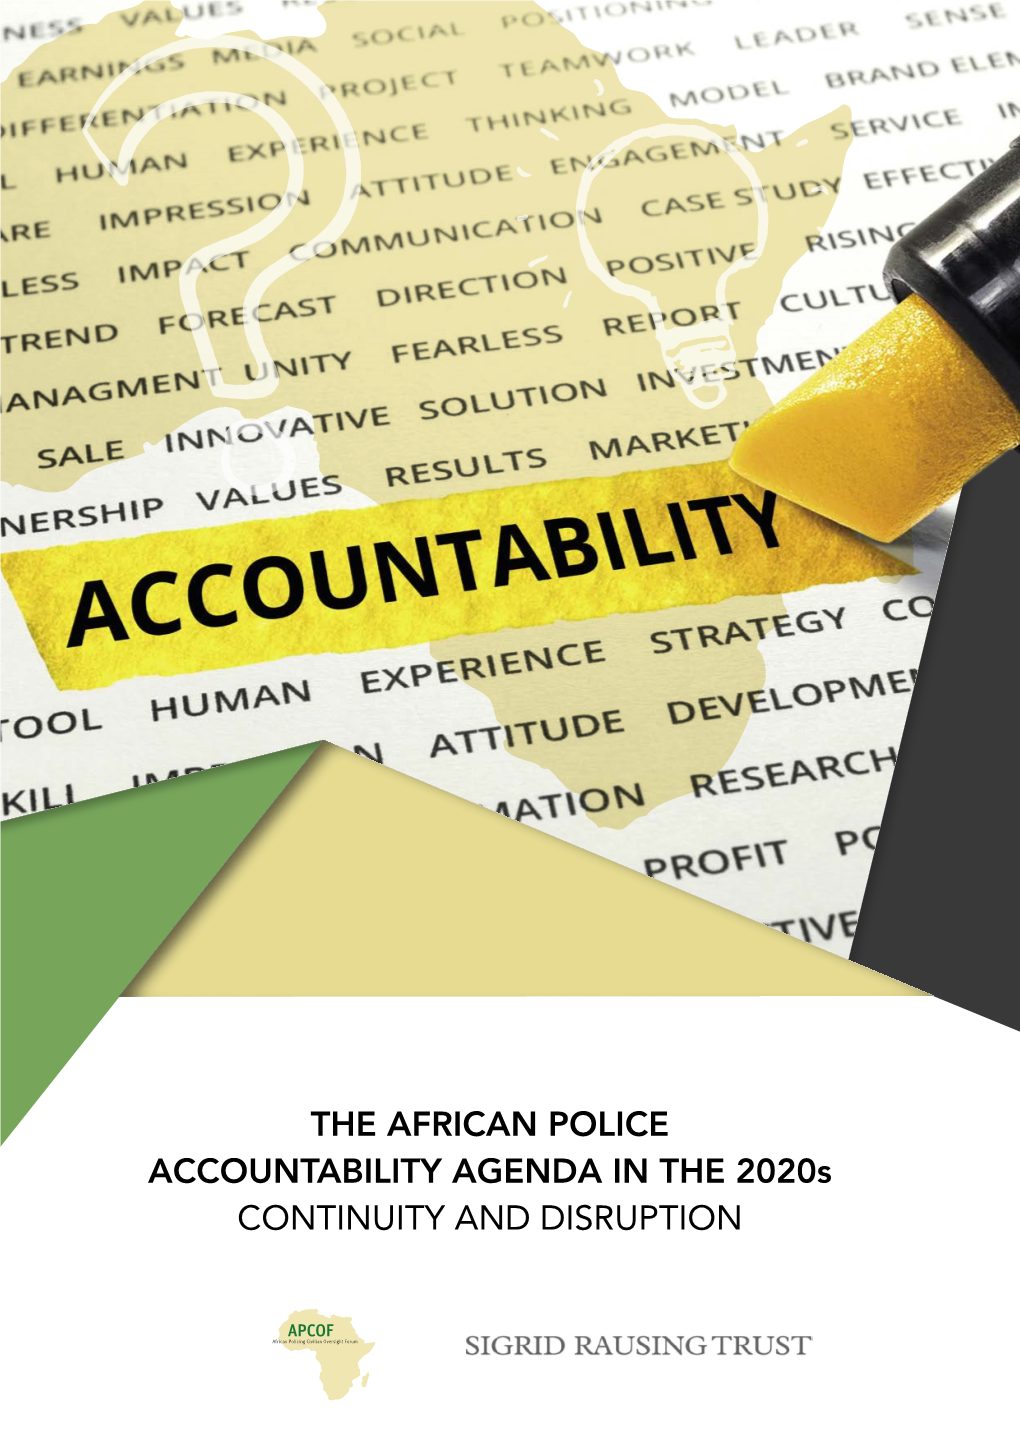 THE AFRICAN POLICE ACCOUNTABILITY AGENDA in the 2020S CONTINUITY and DISRUPTION